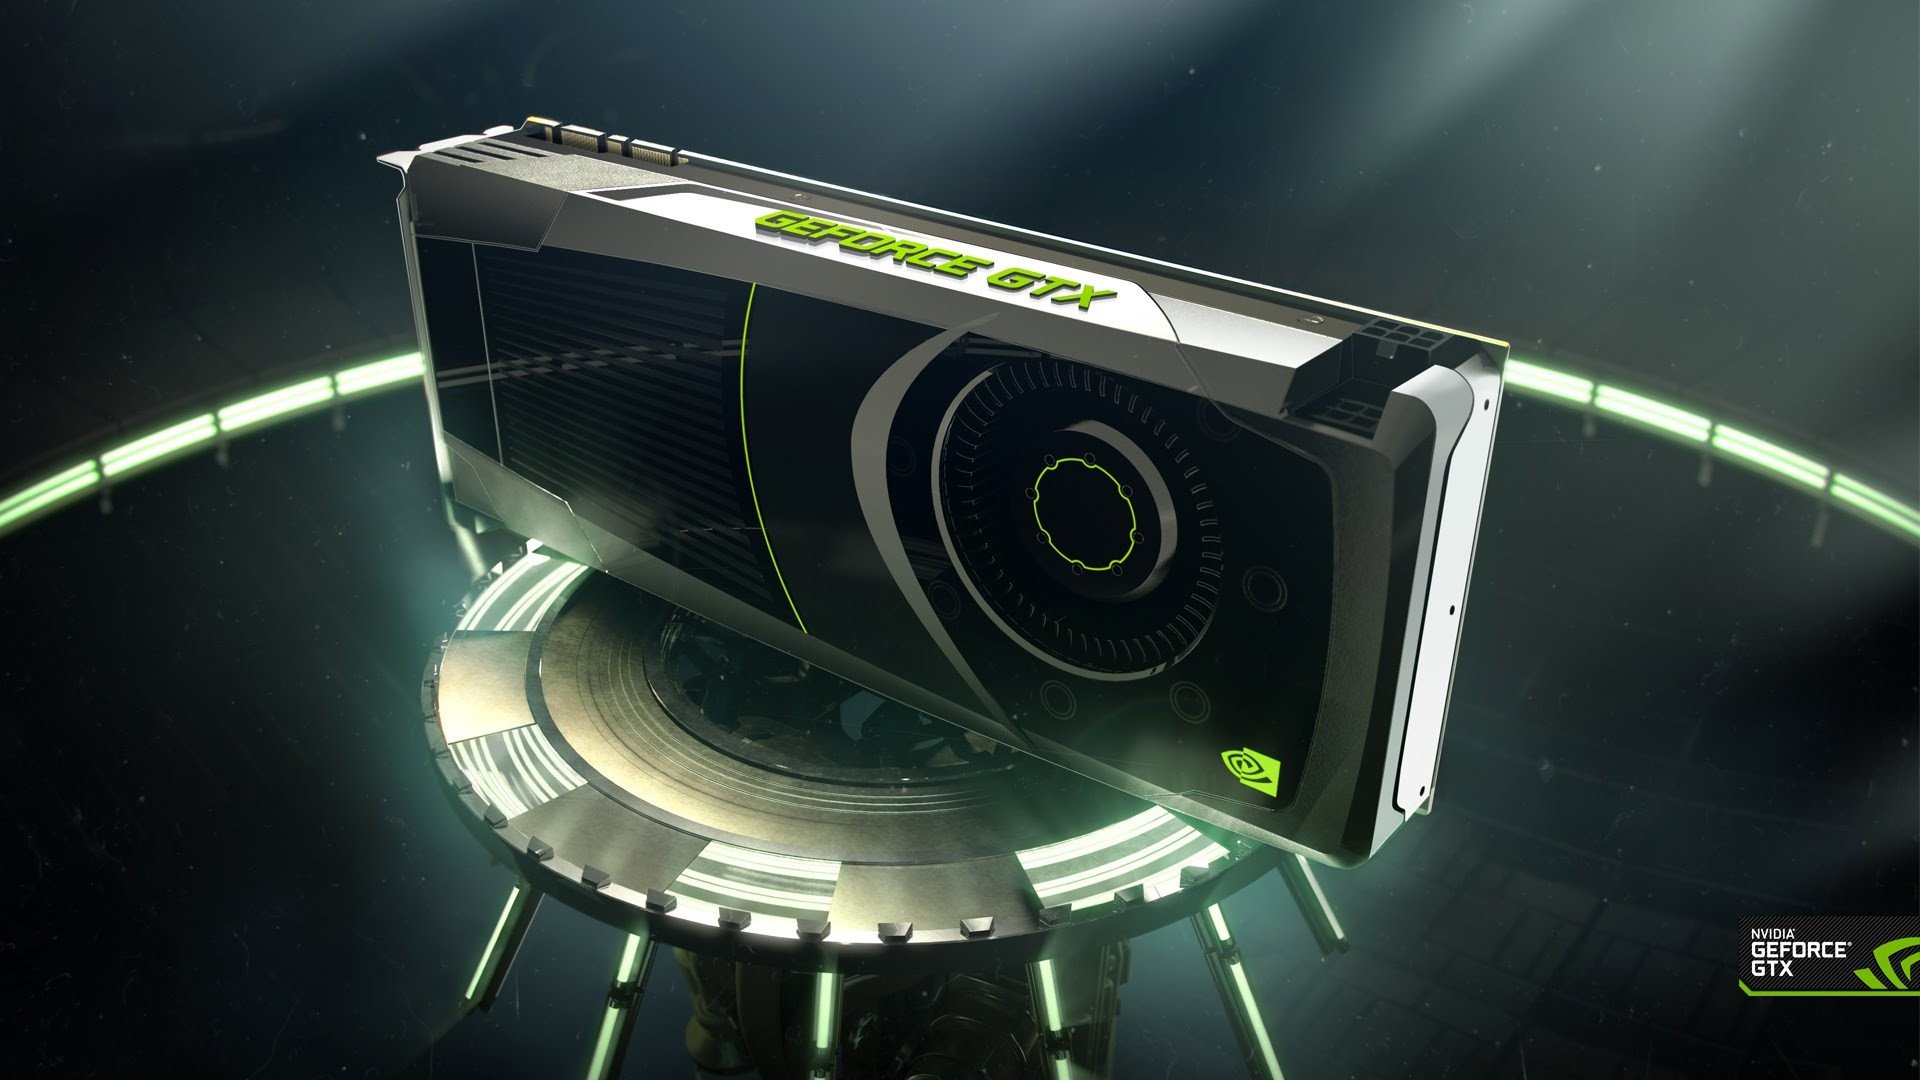 Nvidia GeForce GTX 1080 review: insane gaming and VR power in one graphics card